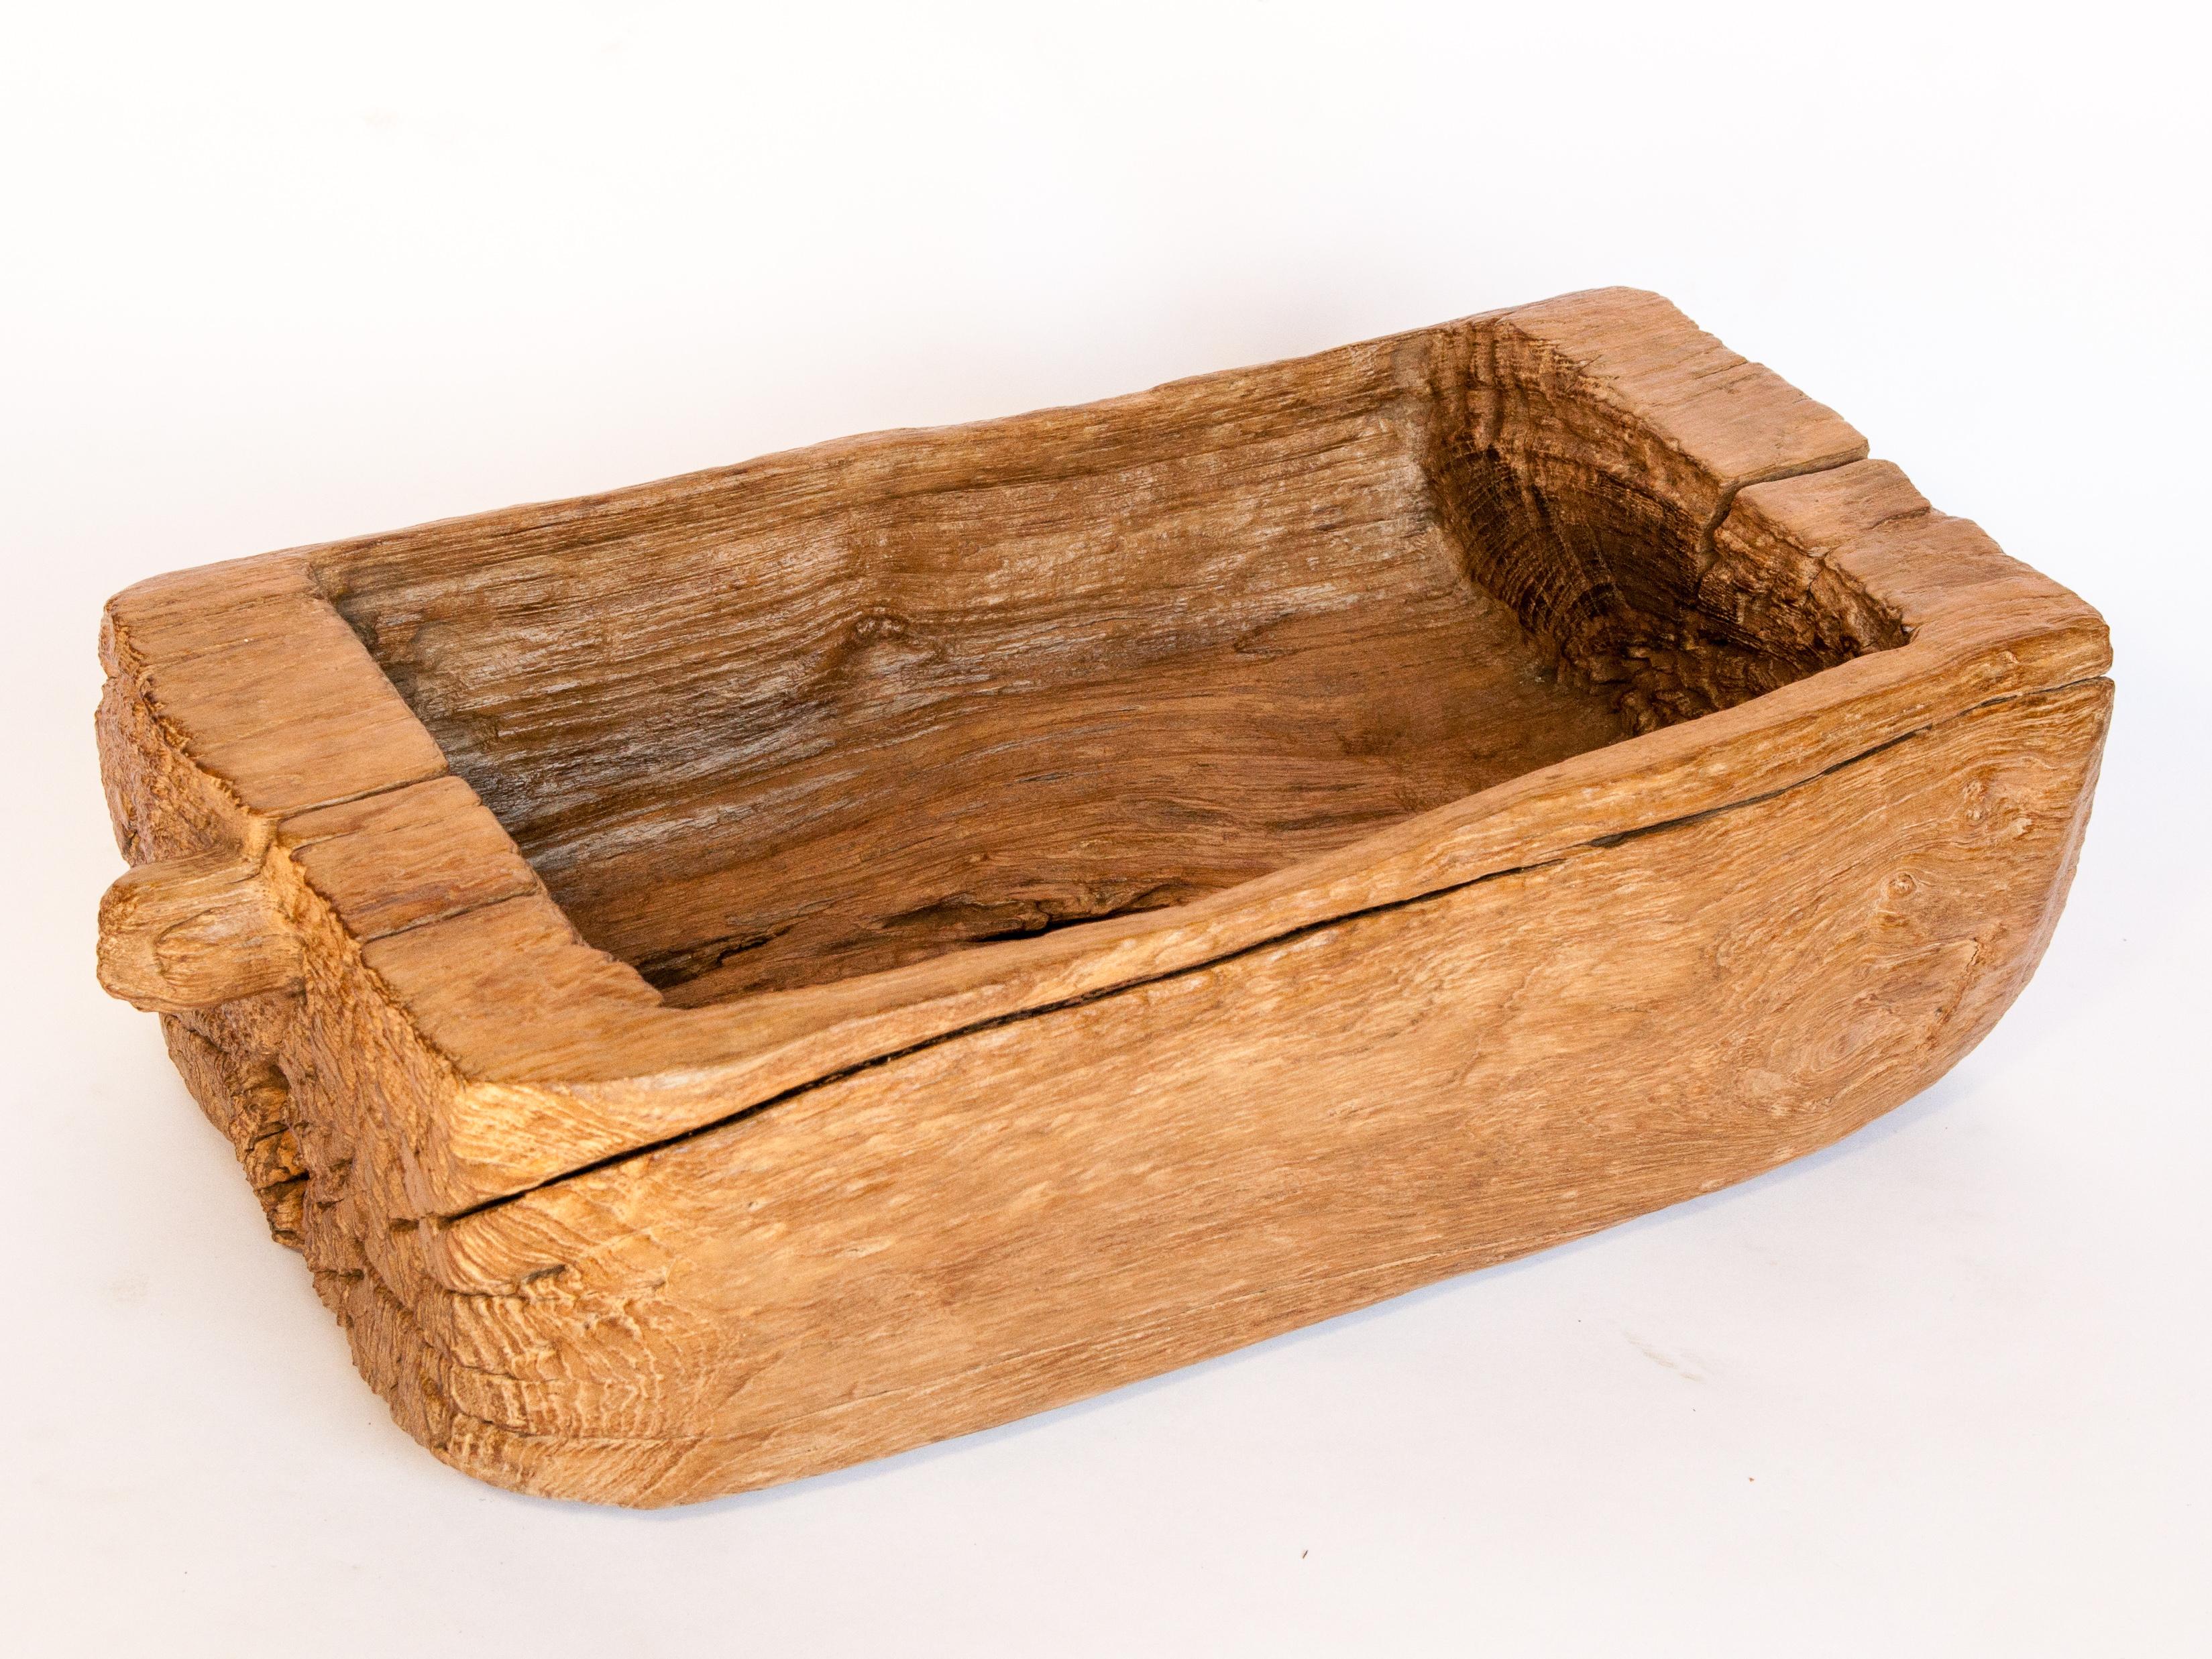 An old eroded teak trough or planter. From North Thailand, mid-20th century.
This rustic teak trough makes for a beautiful tabletop or garden planter. It comes from a rural household in North Thailand where it was fashioned by hand using simple